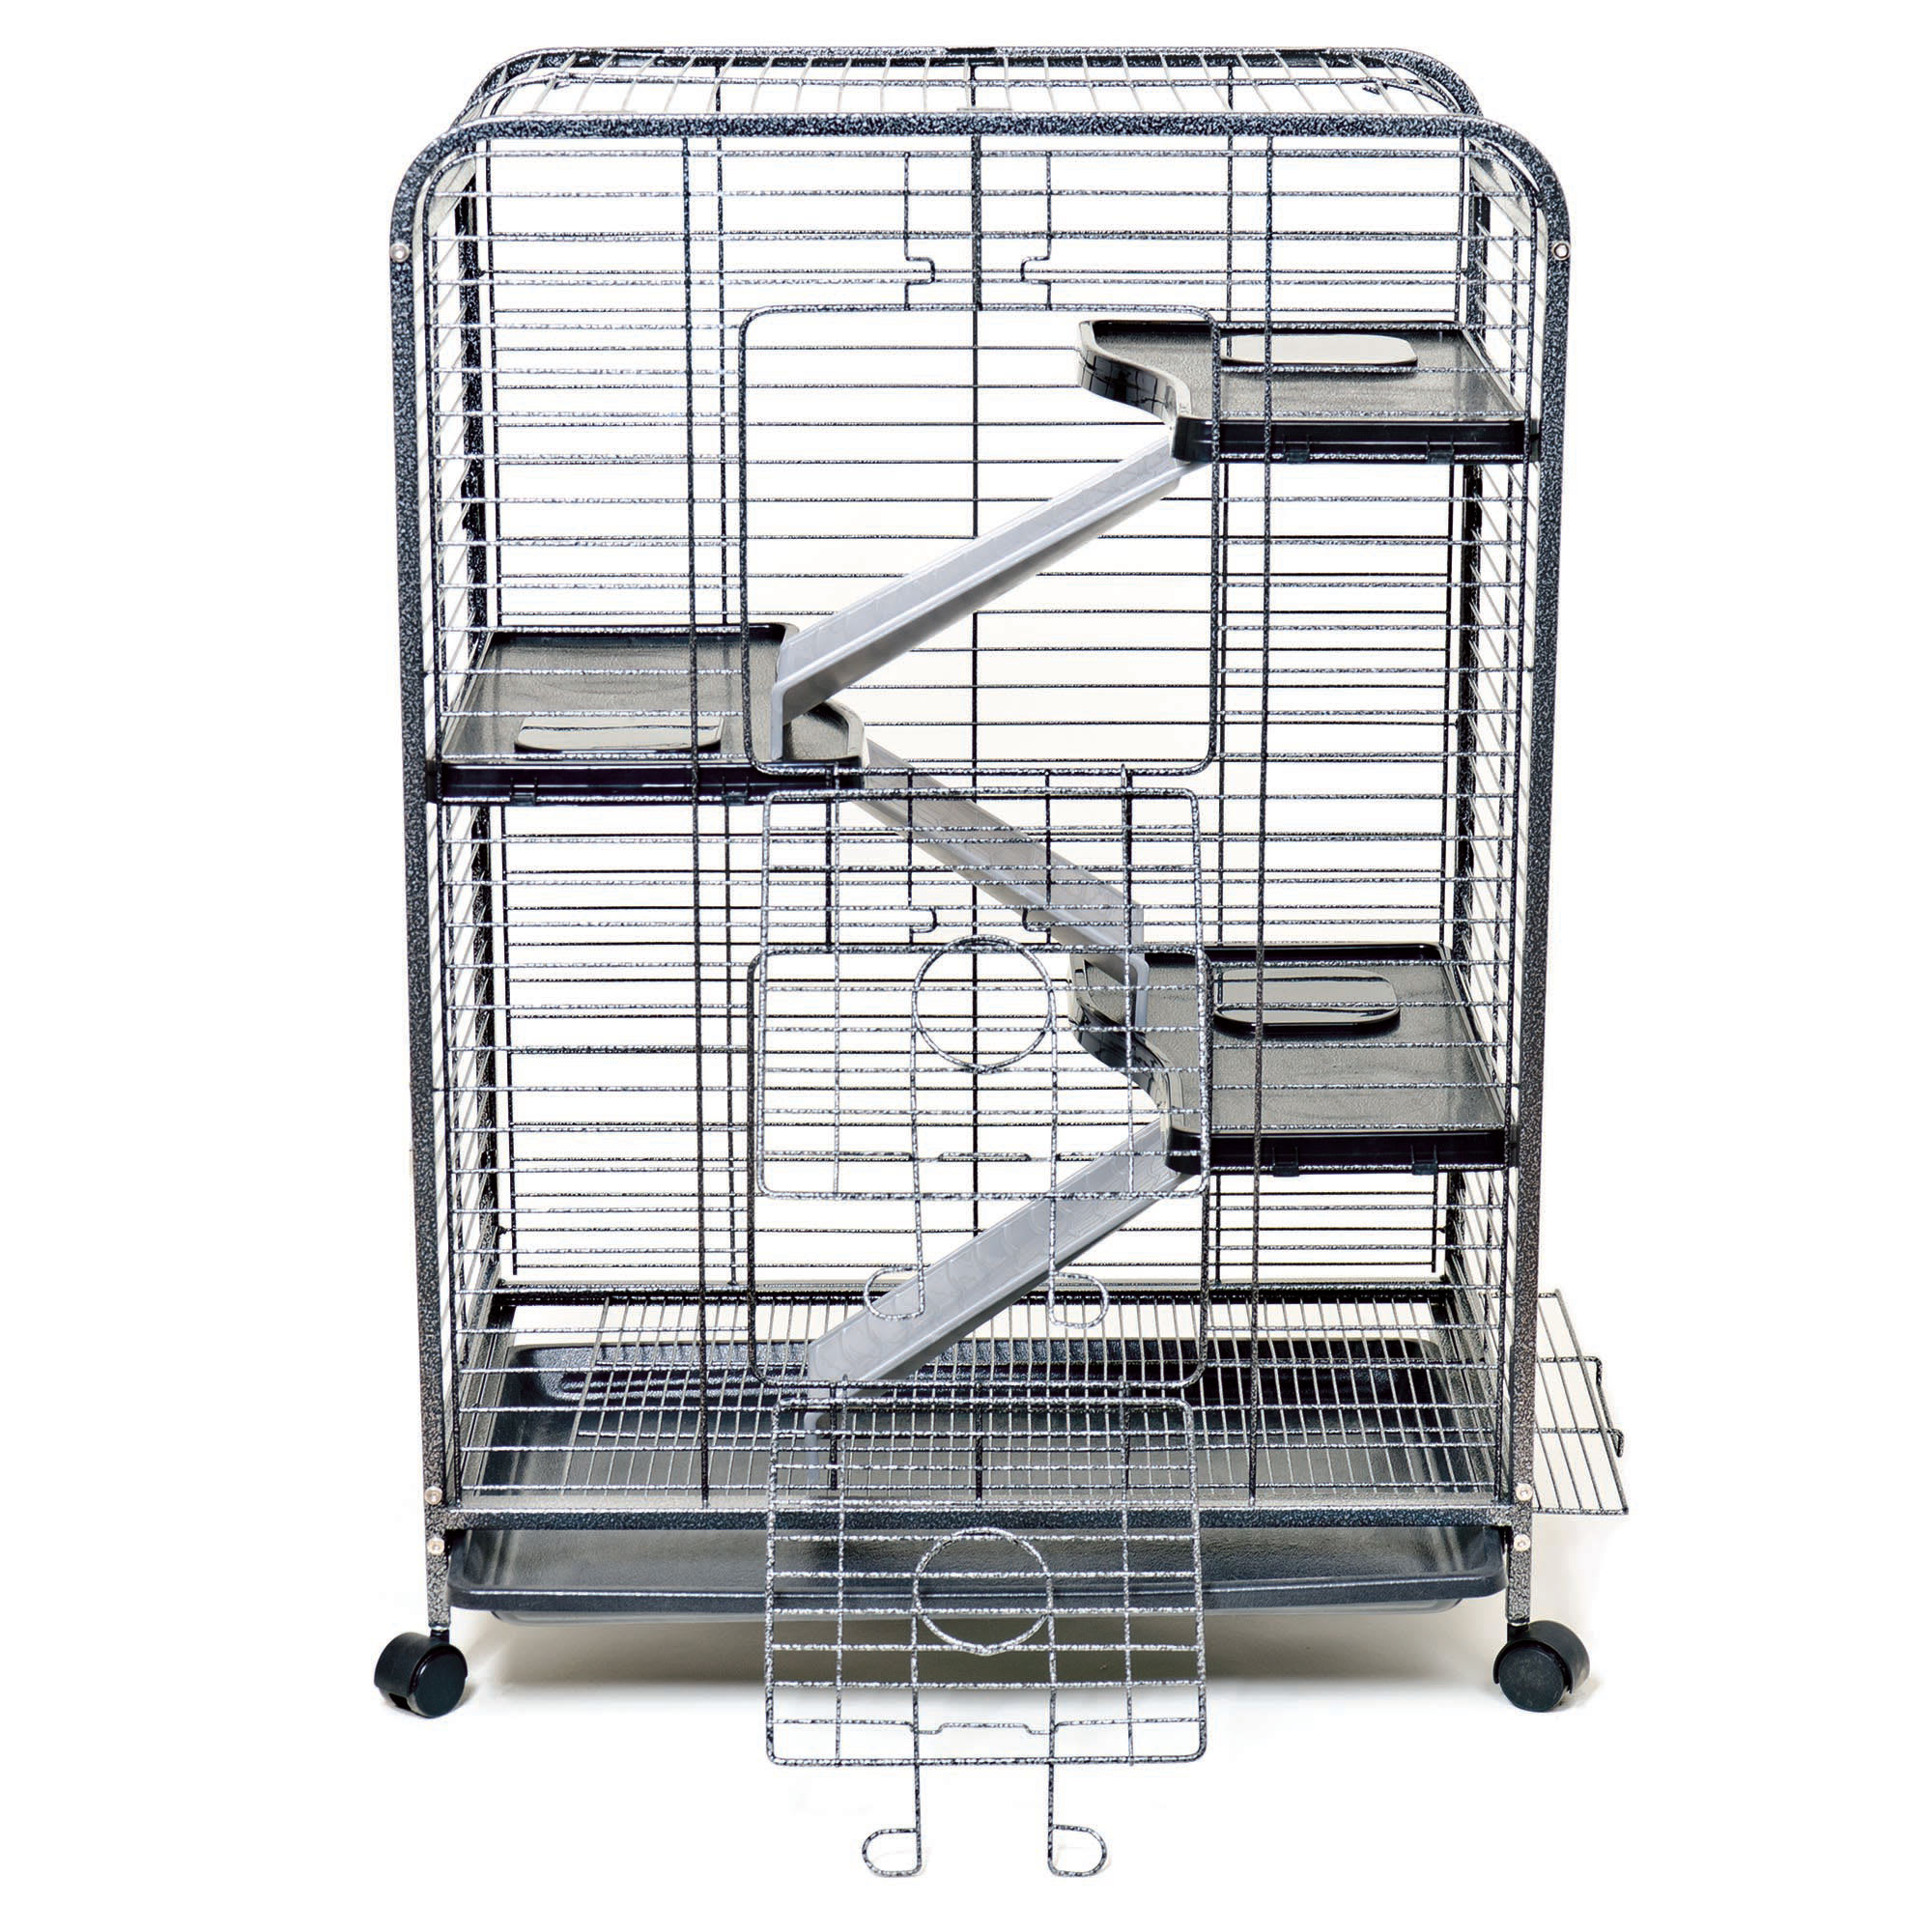 Photos - Rodent Cage / House WARE WARE Indoor 4 Level Hutch Small Animal Cage, 17.25 IN, Black / Grey 0